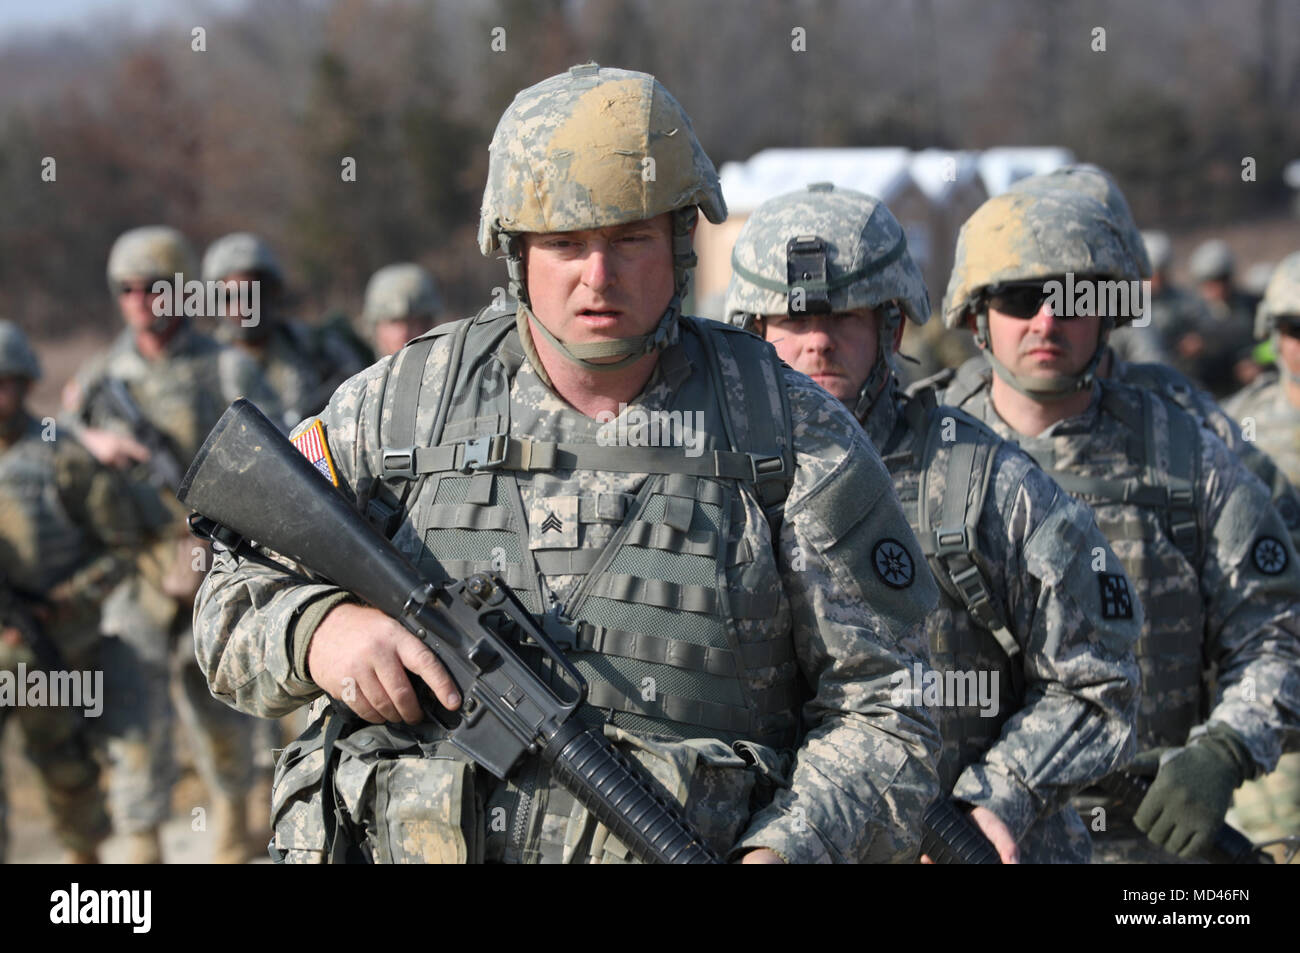 U.S. Army Reserve Soldiers march during the Combat Support Training Exercise (CSTX) 78-18-03 at Fort Knox, Kentucky, March 15, 2018. CSTX 78-18-03 is a training exercise that ensures America's Army Reserve units and Soldiers are trained and ready to deploy on short-notice and bring capable, combat-ready and lethal firepower in support of the Army and our joint partners anywhere in the world.  (U.S. Army Reserve photo by Spc. Torrance Saunders) Stock Photo